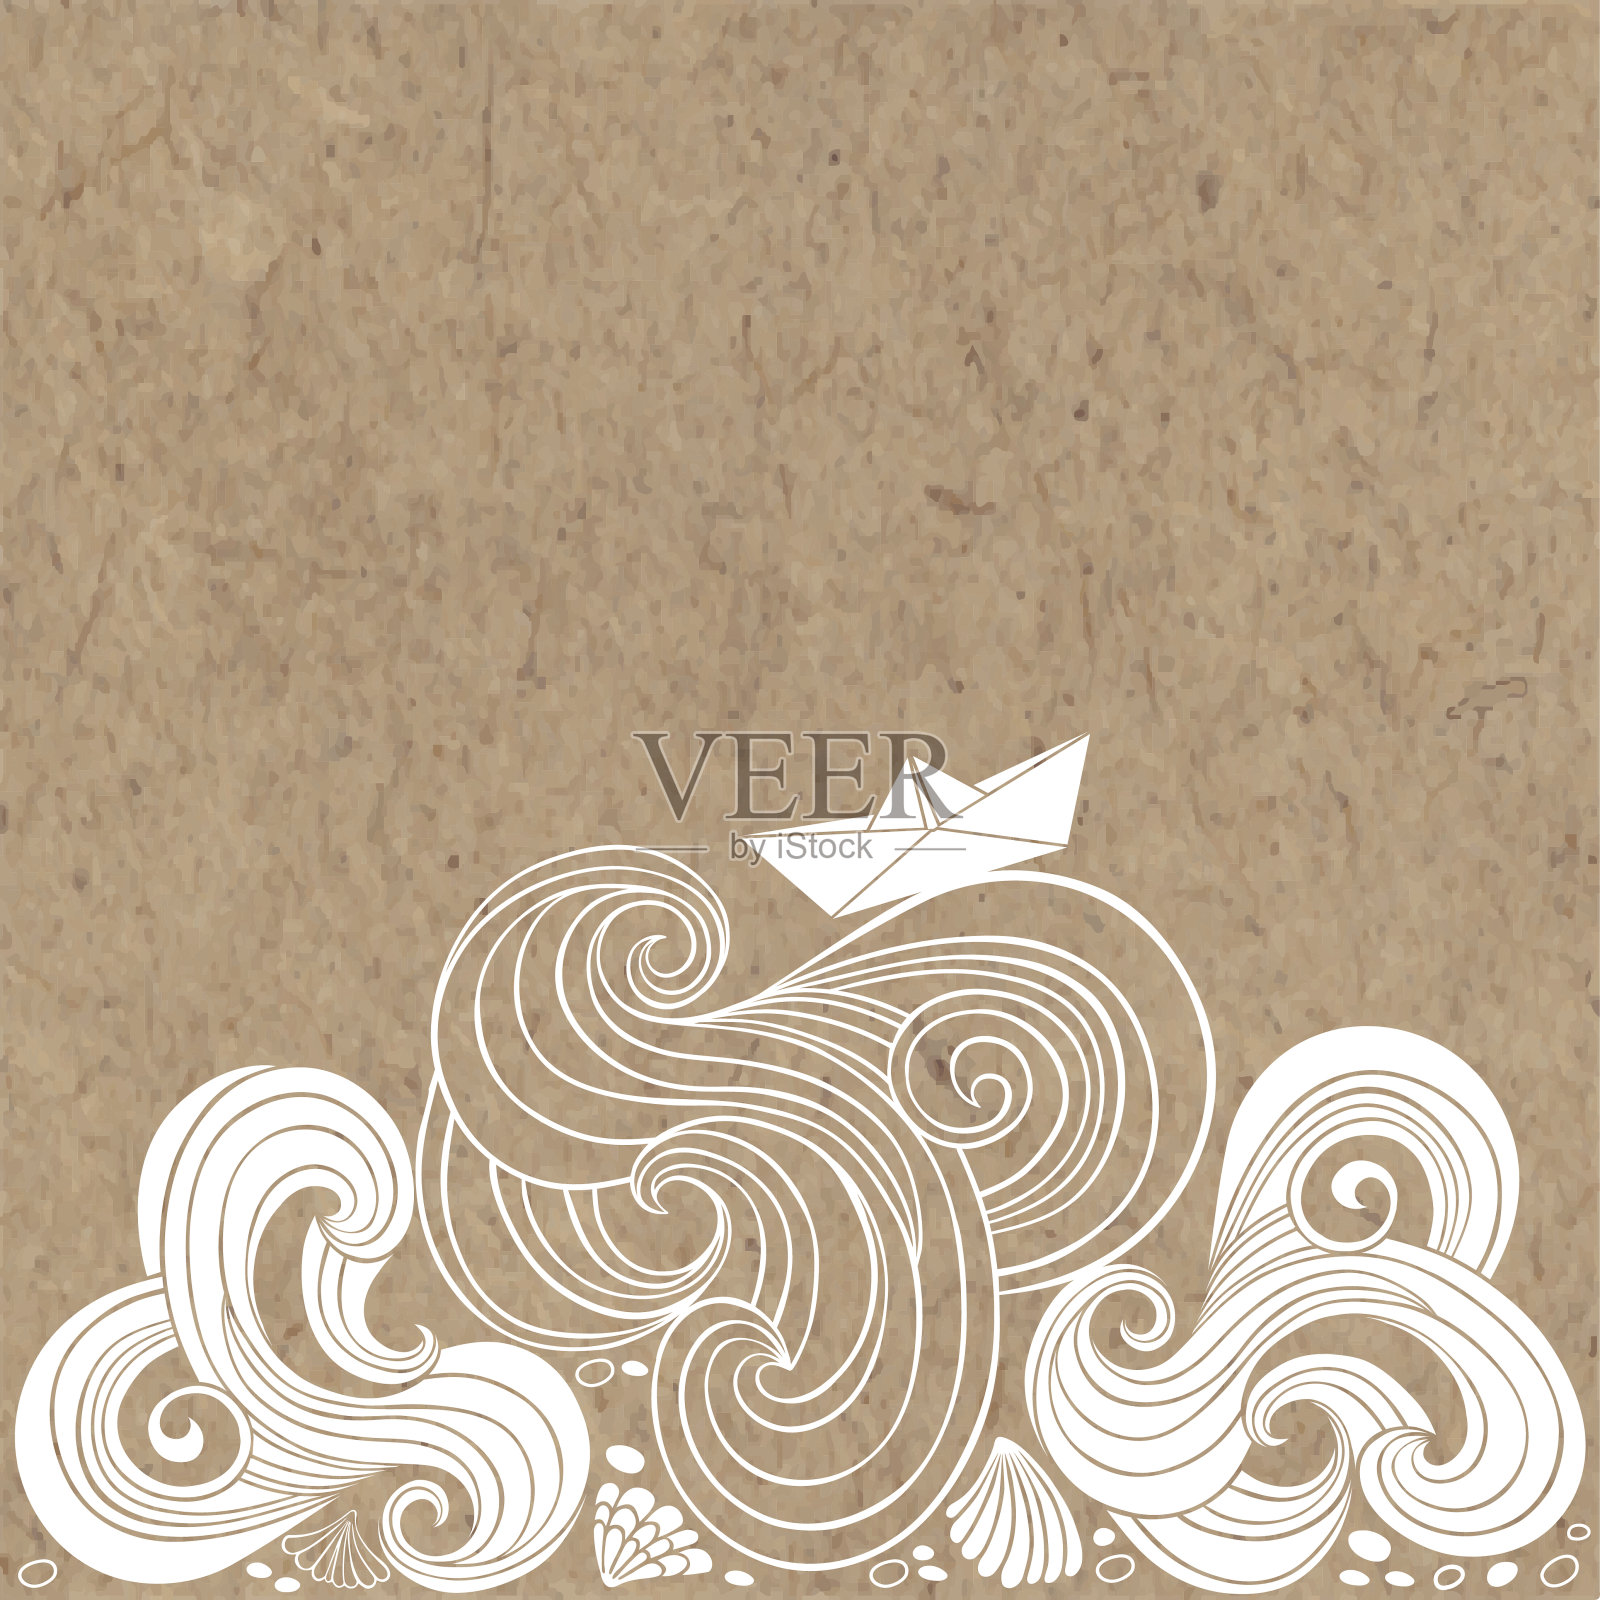 Marine background on kraft paper. Vector illustration with space for text, can be used  creating card or invitation card.背景图片素材